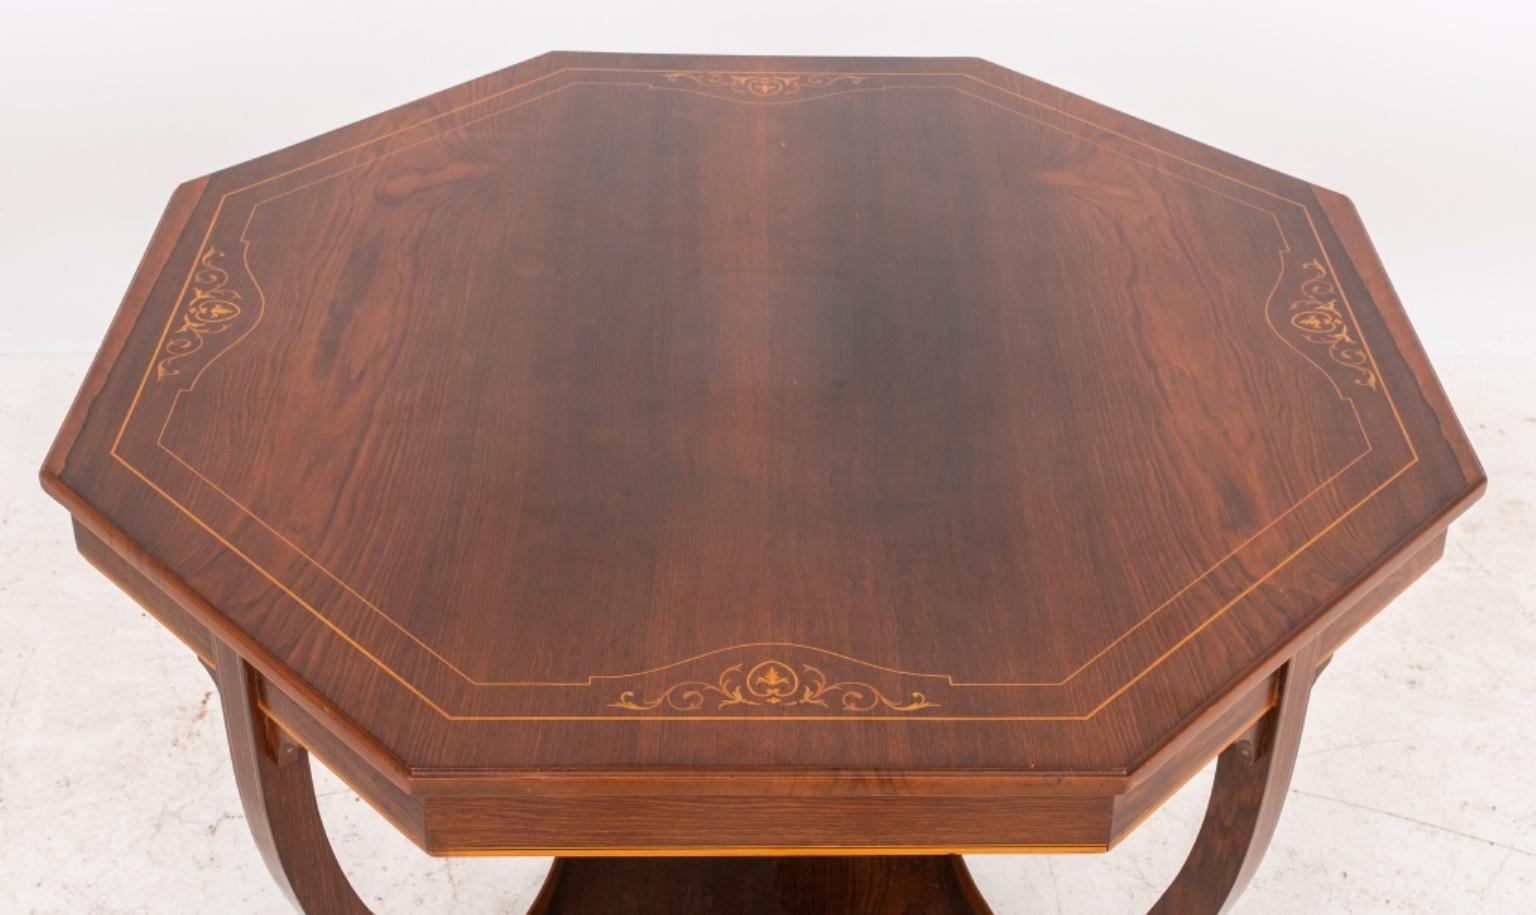 Edwardian Octagonal Inlaid Rosewood Lamp Table For Sale 2